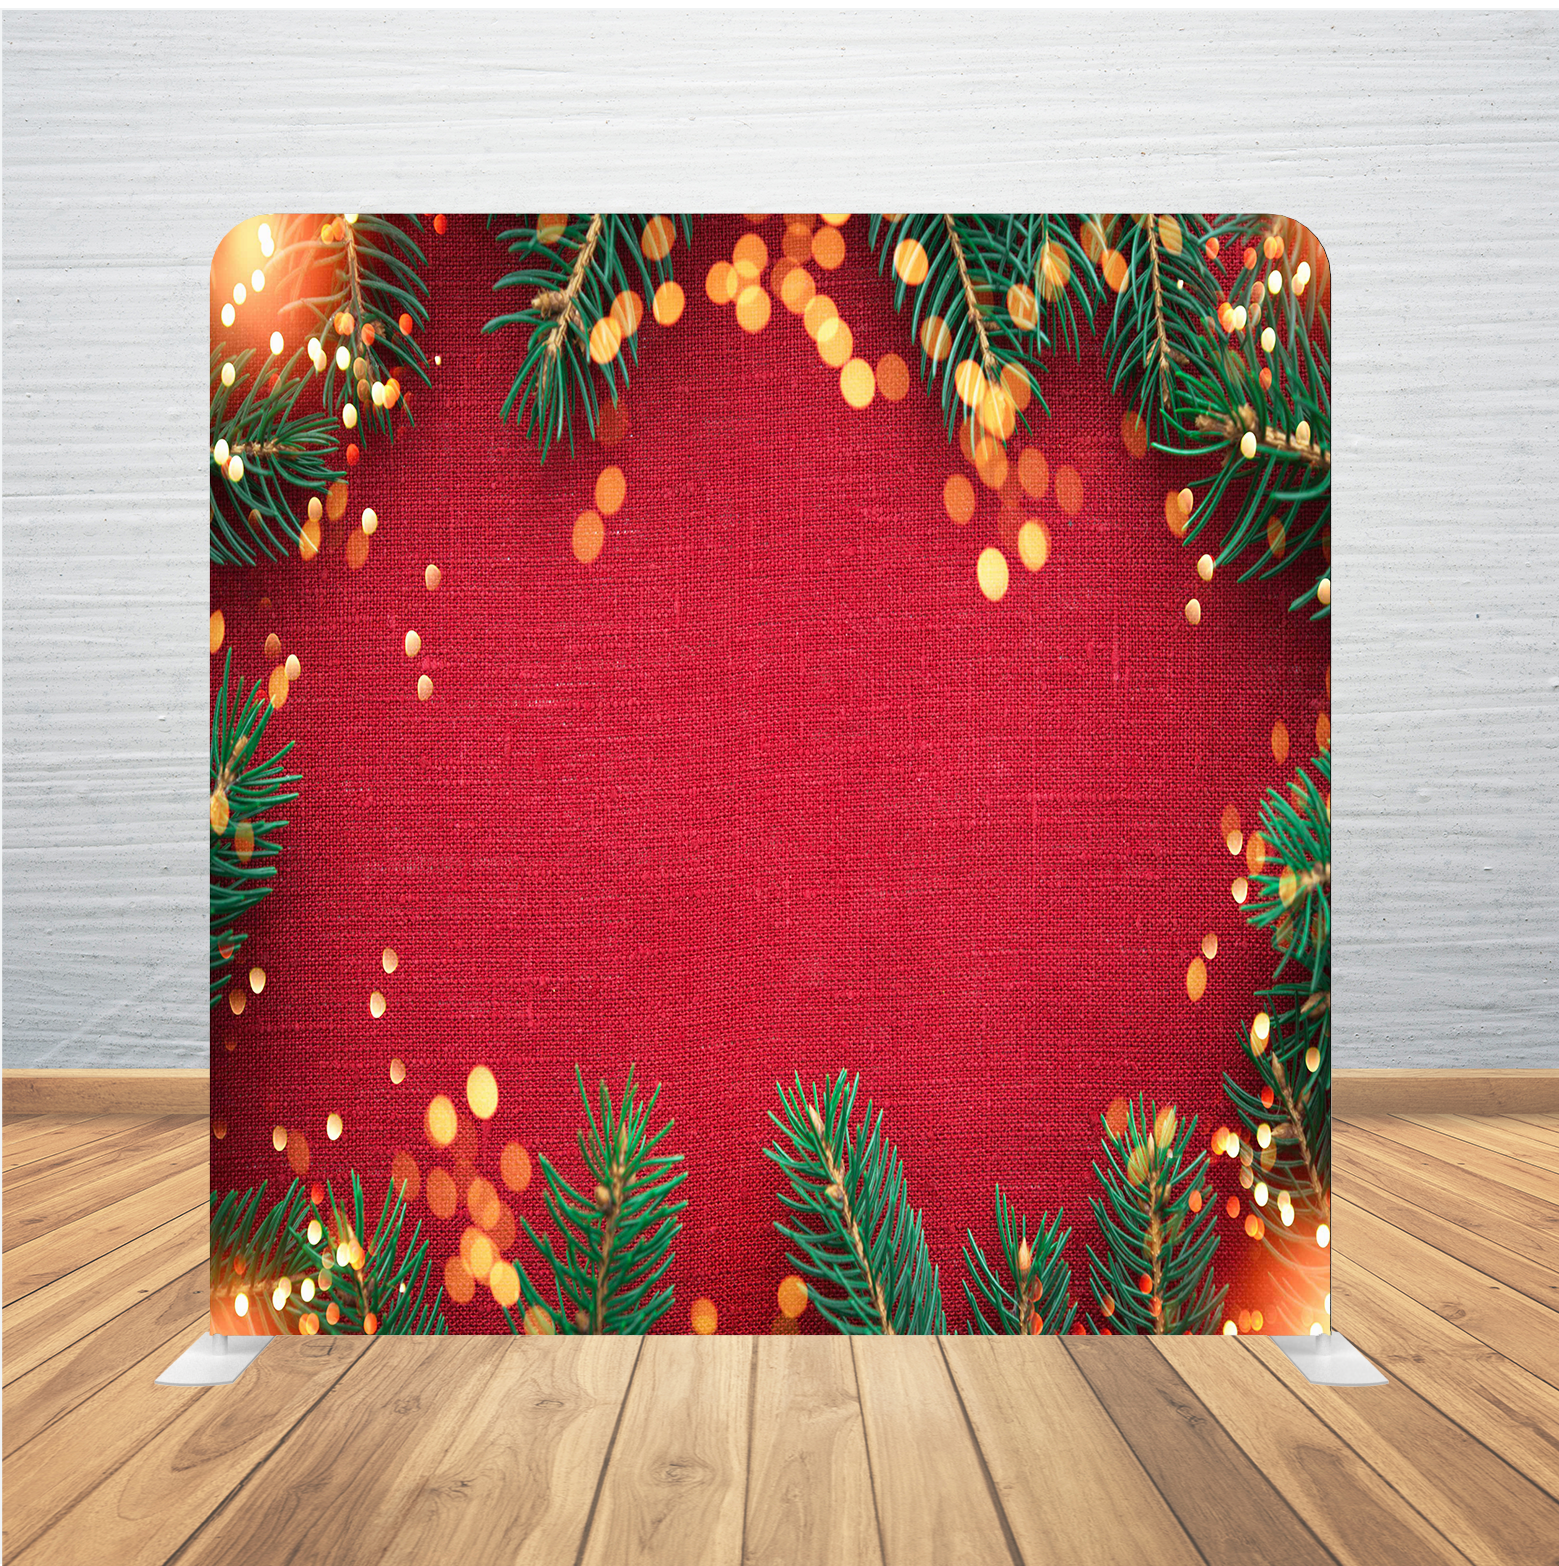 8X8 Pillowcase Tension Backdrop- Red Pine Leaves